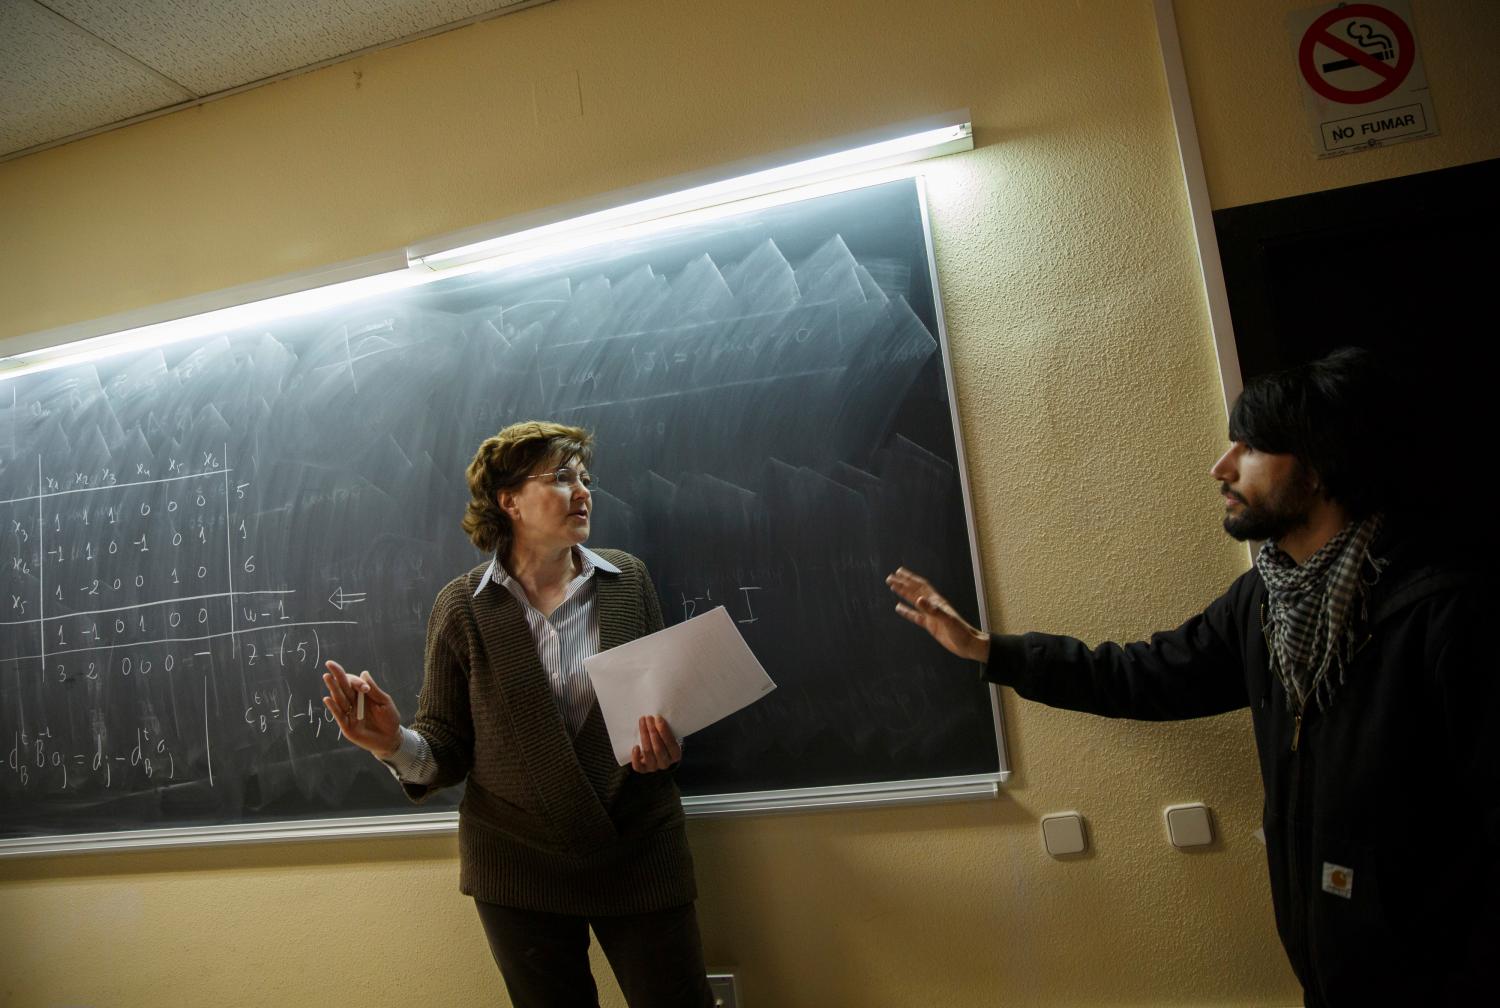 A professor tries to stop striking students from disrupting her class at Complutense University on the second day of a 48-hour student strike to protest against rising fees and educational cuts in Madrid March 27, 2014.